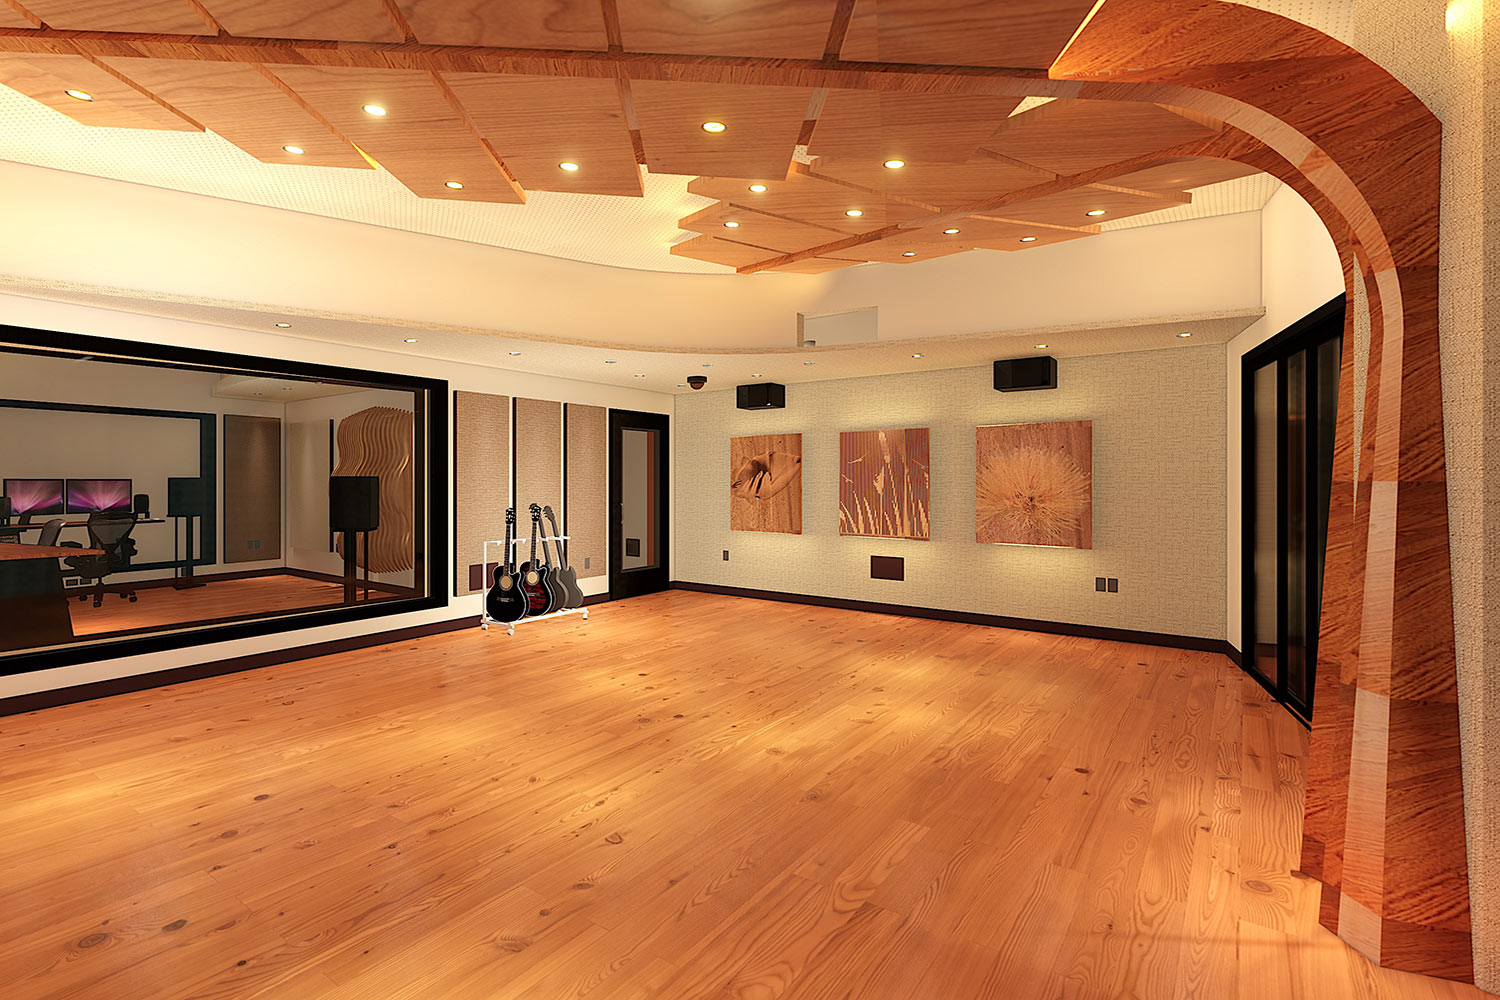 One of Hawaii’s only schools providing students with both pro audio and pro video production training, the Washington Middle School reached out to WSDG to create a state-of-the-art dual-purpose teaching studio. Live room koa tree diffusor render.